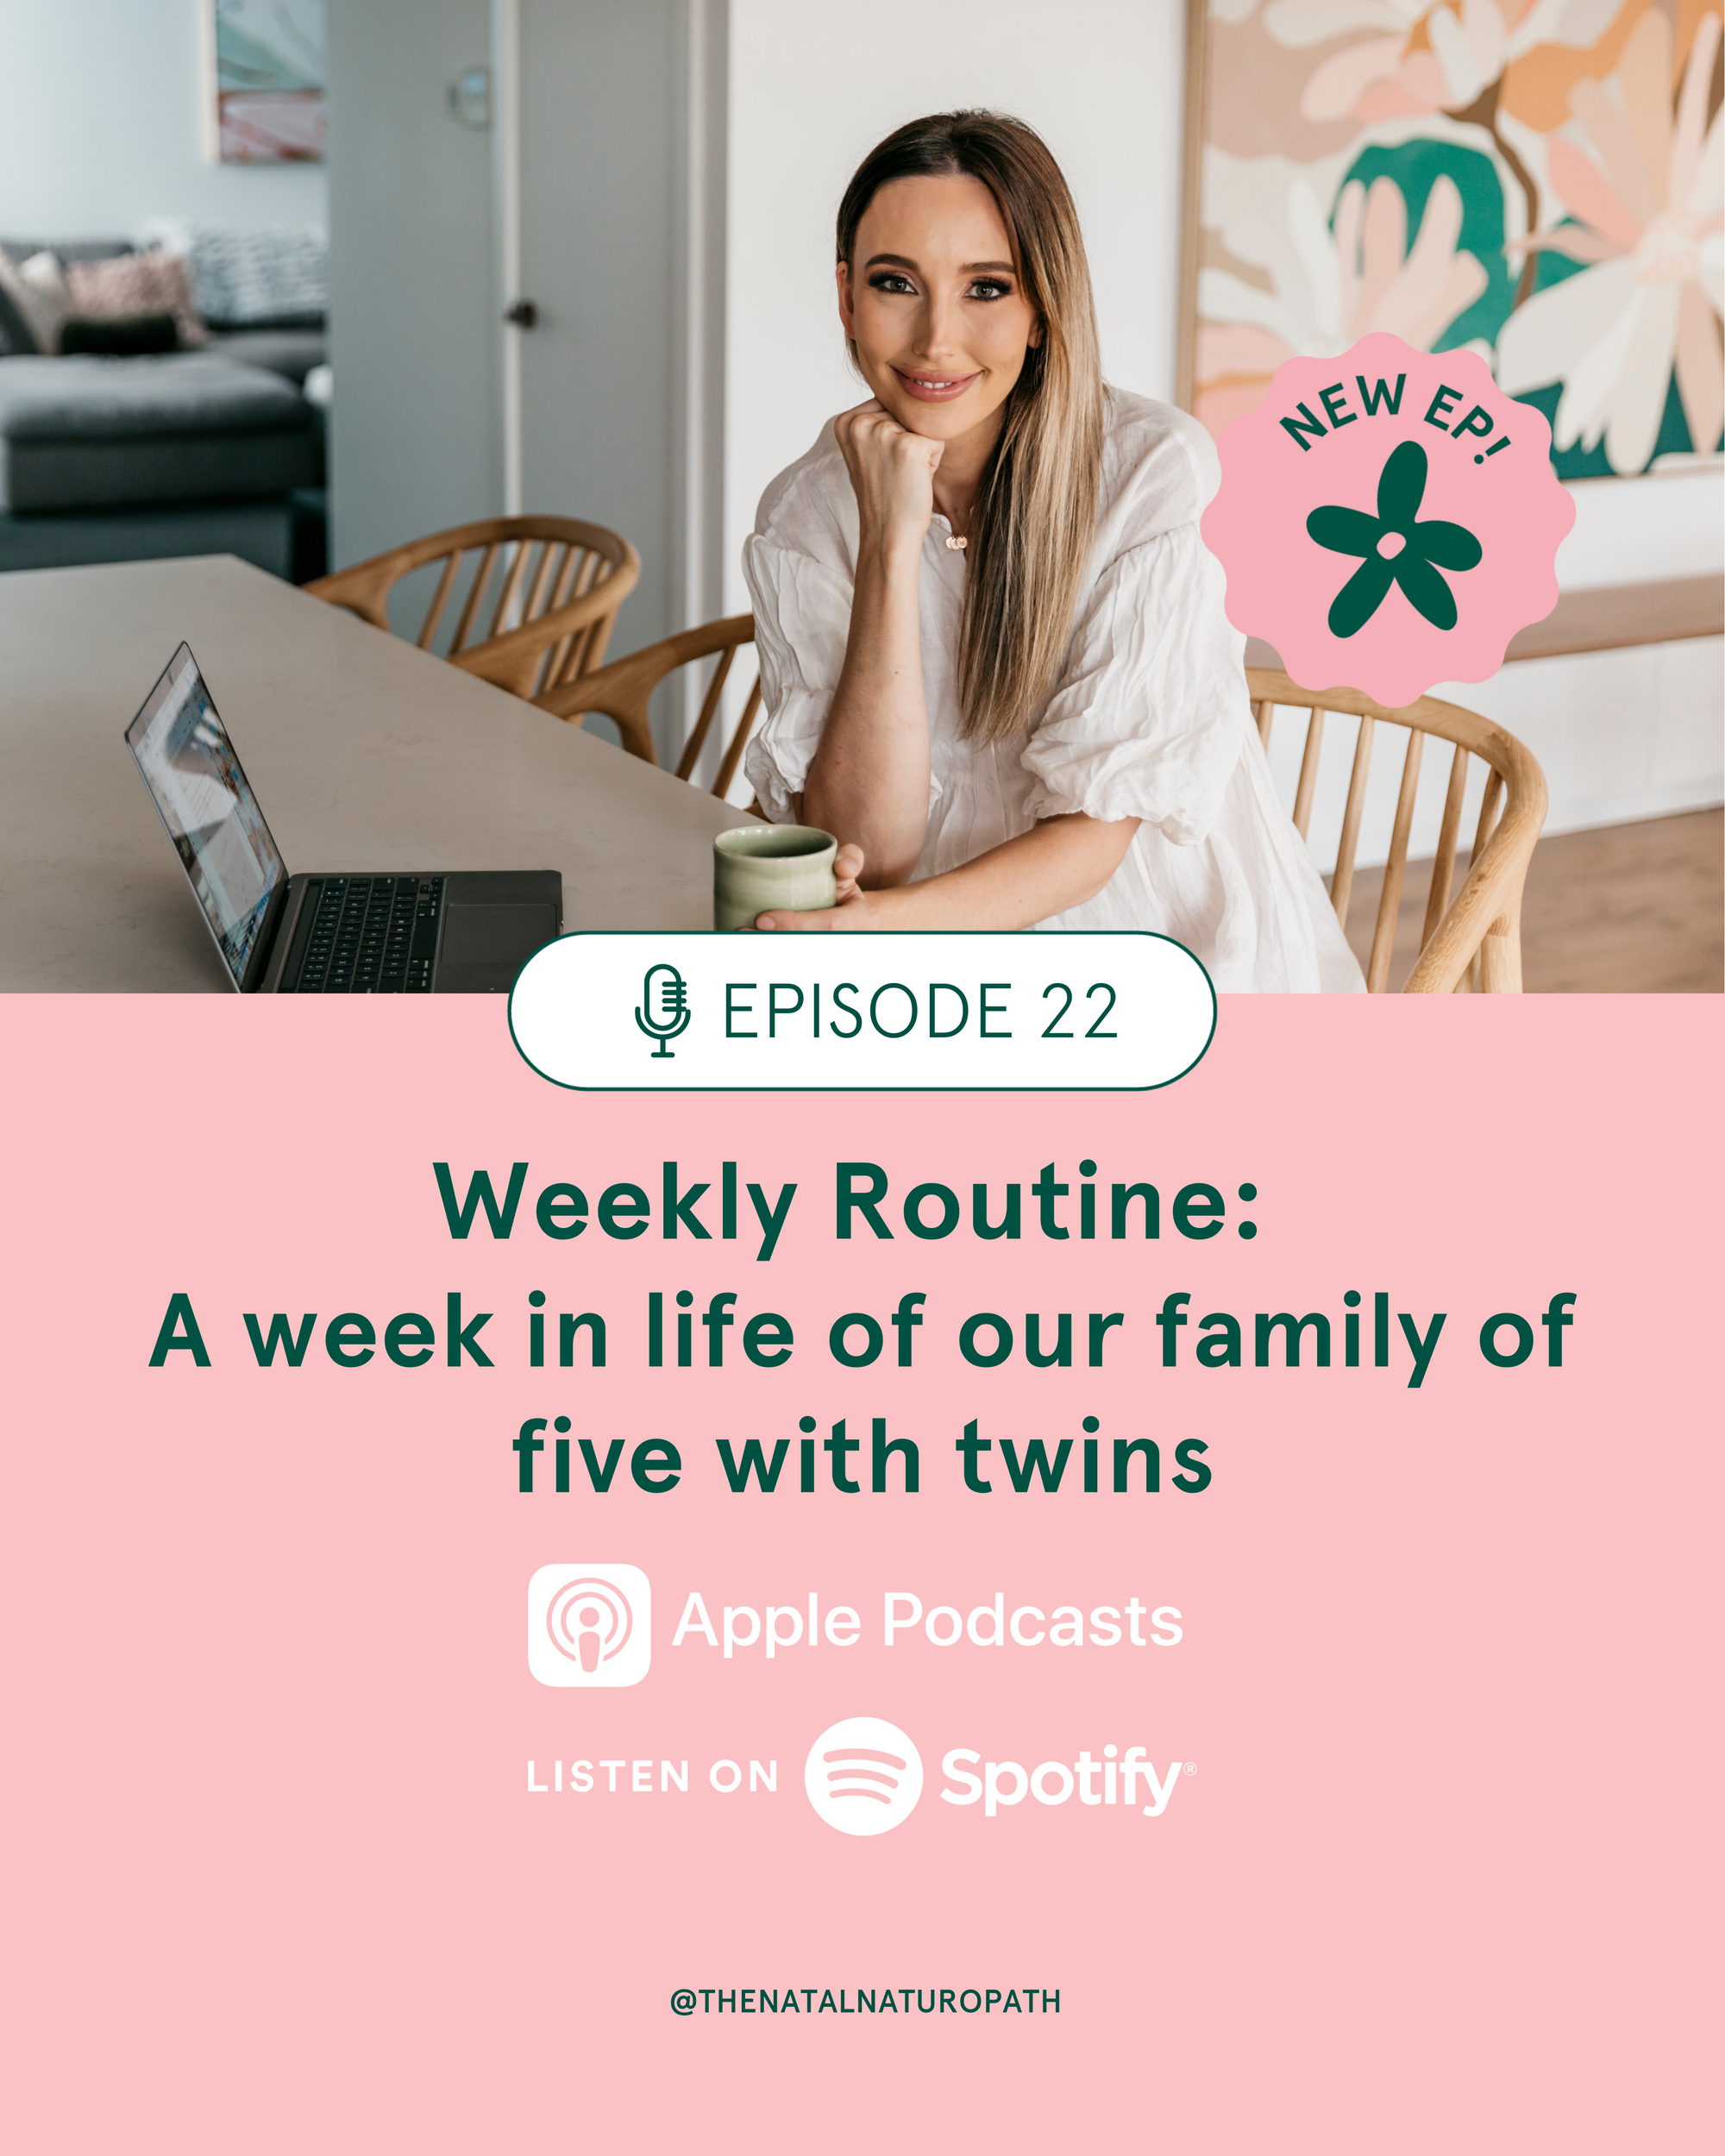 Weekly Routine: A week in life of our family of five with twins